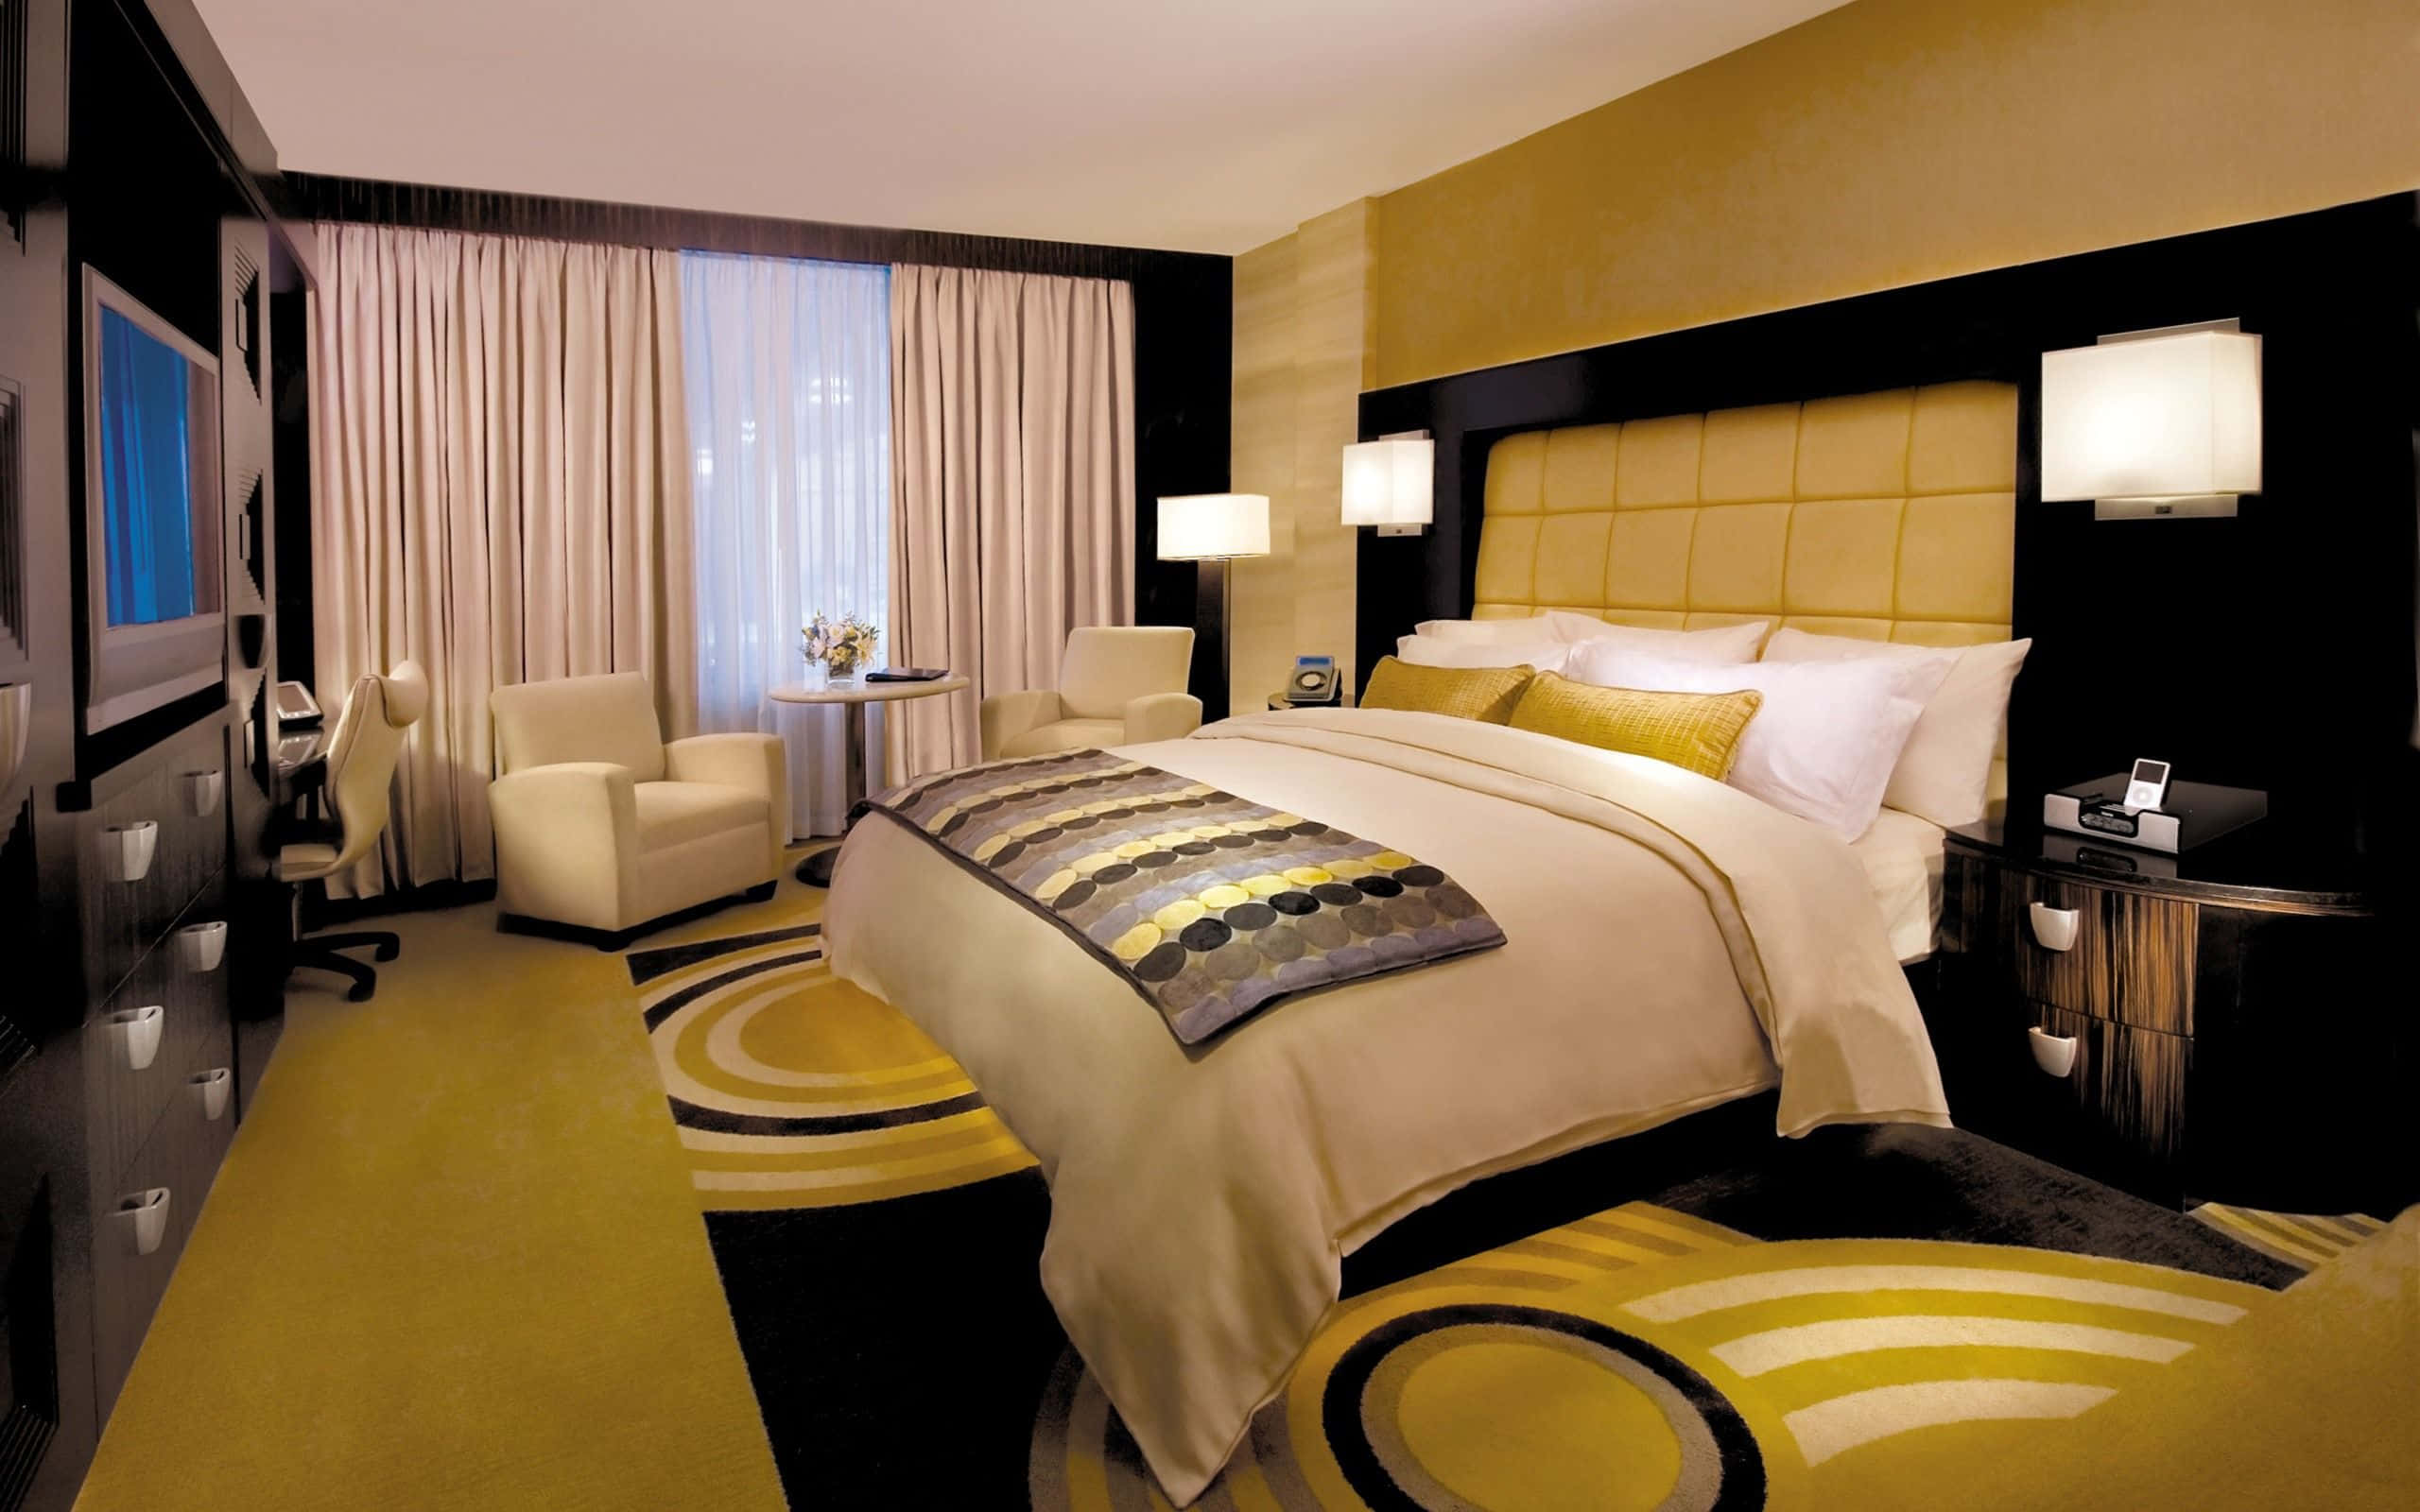 Luxurious Hotel Room with City View